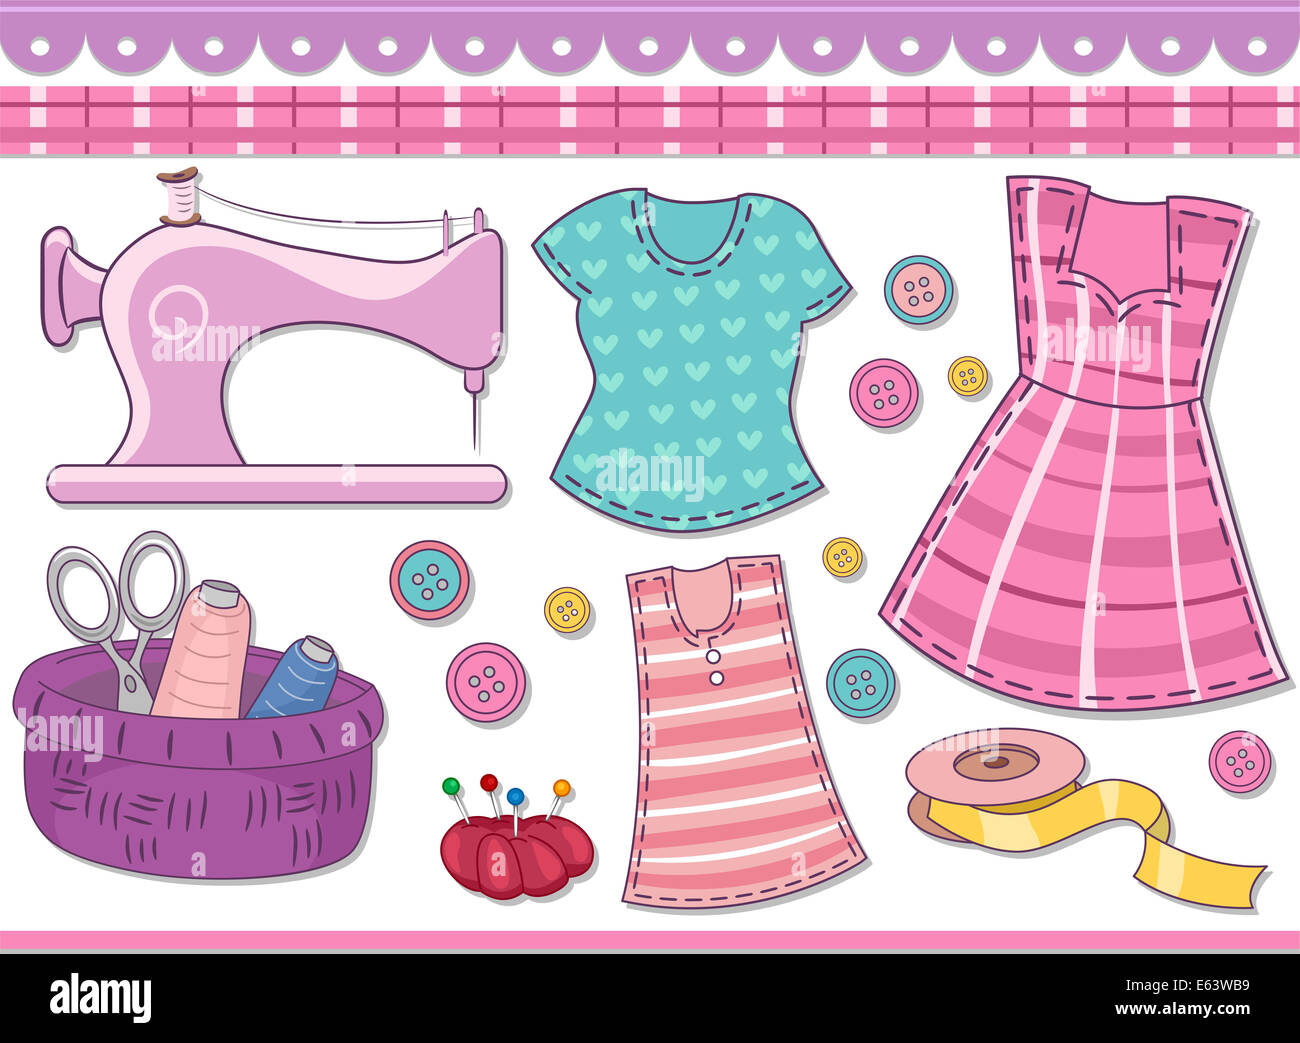 Illustration Featuring Different Sewing Materials for Scrapbooking Stock Photo